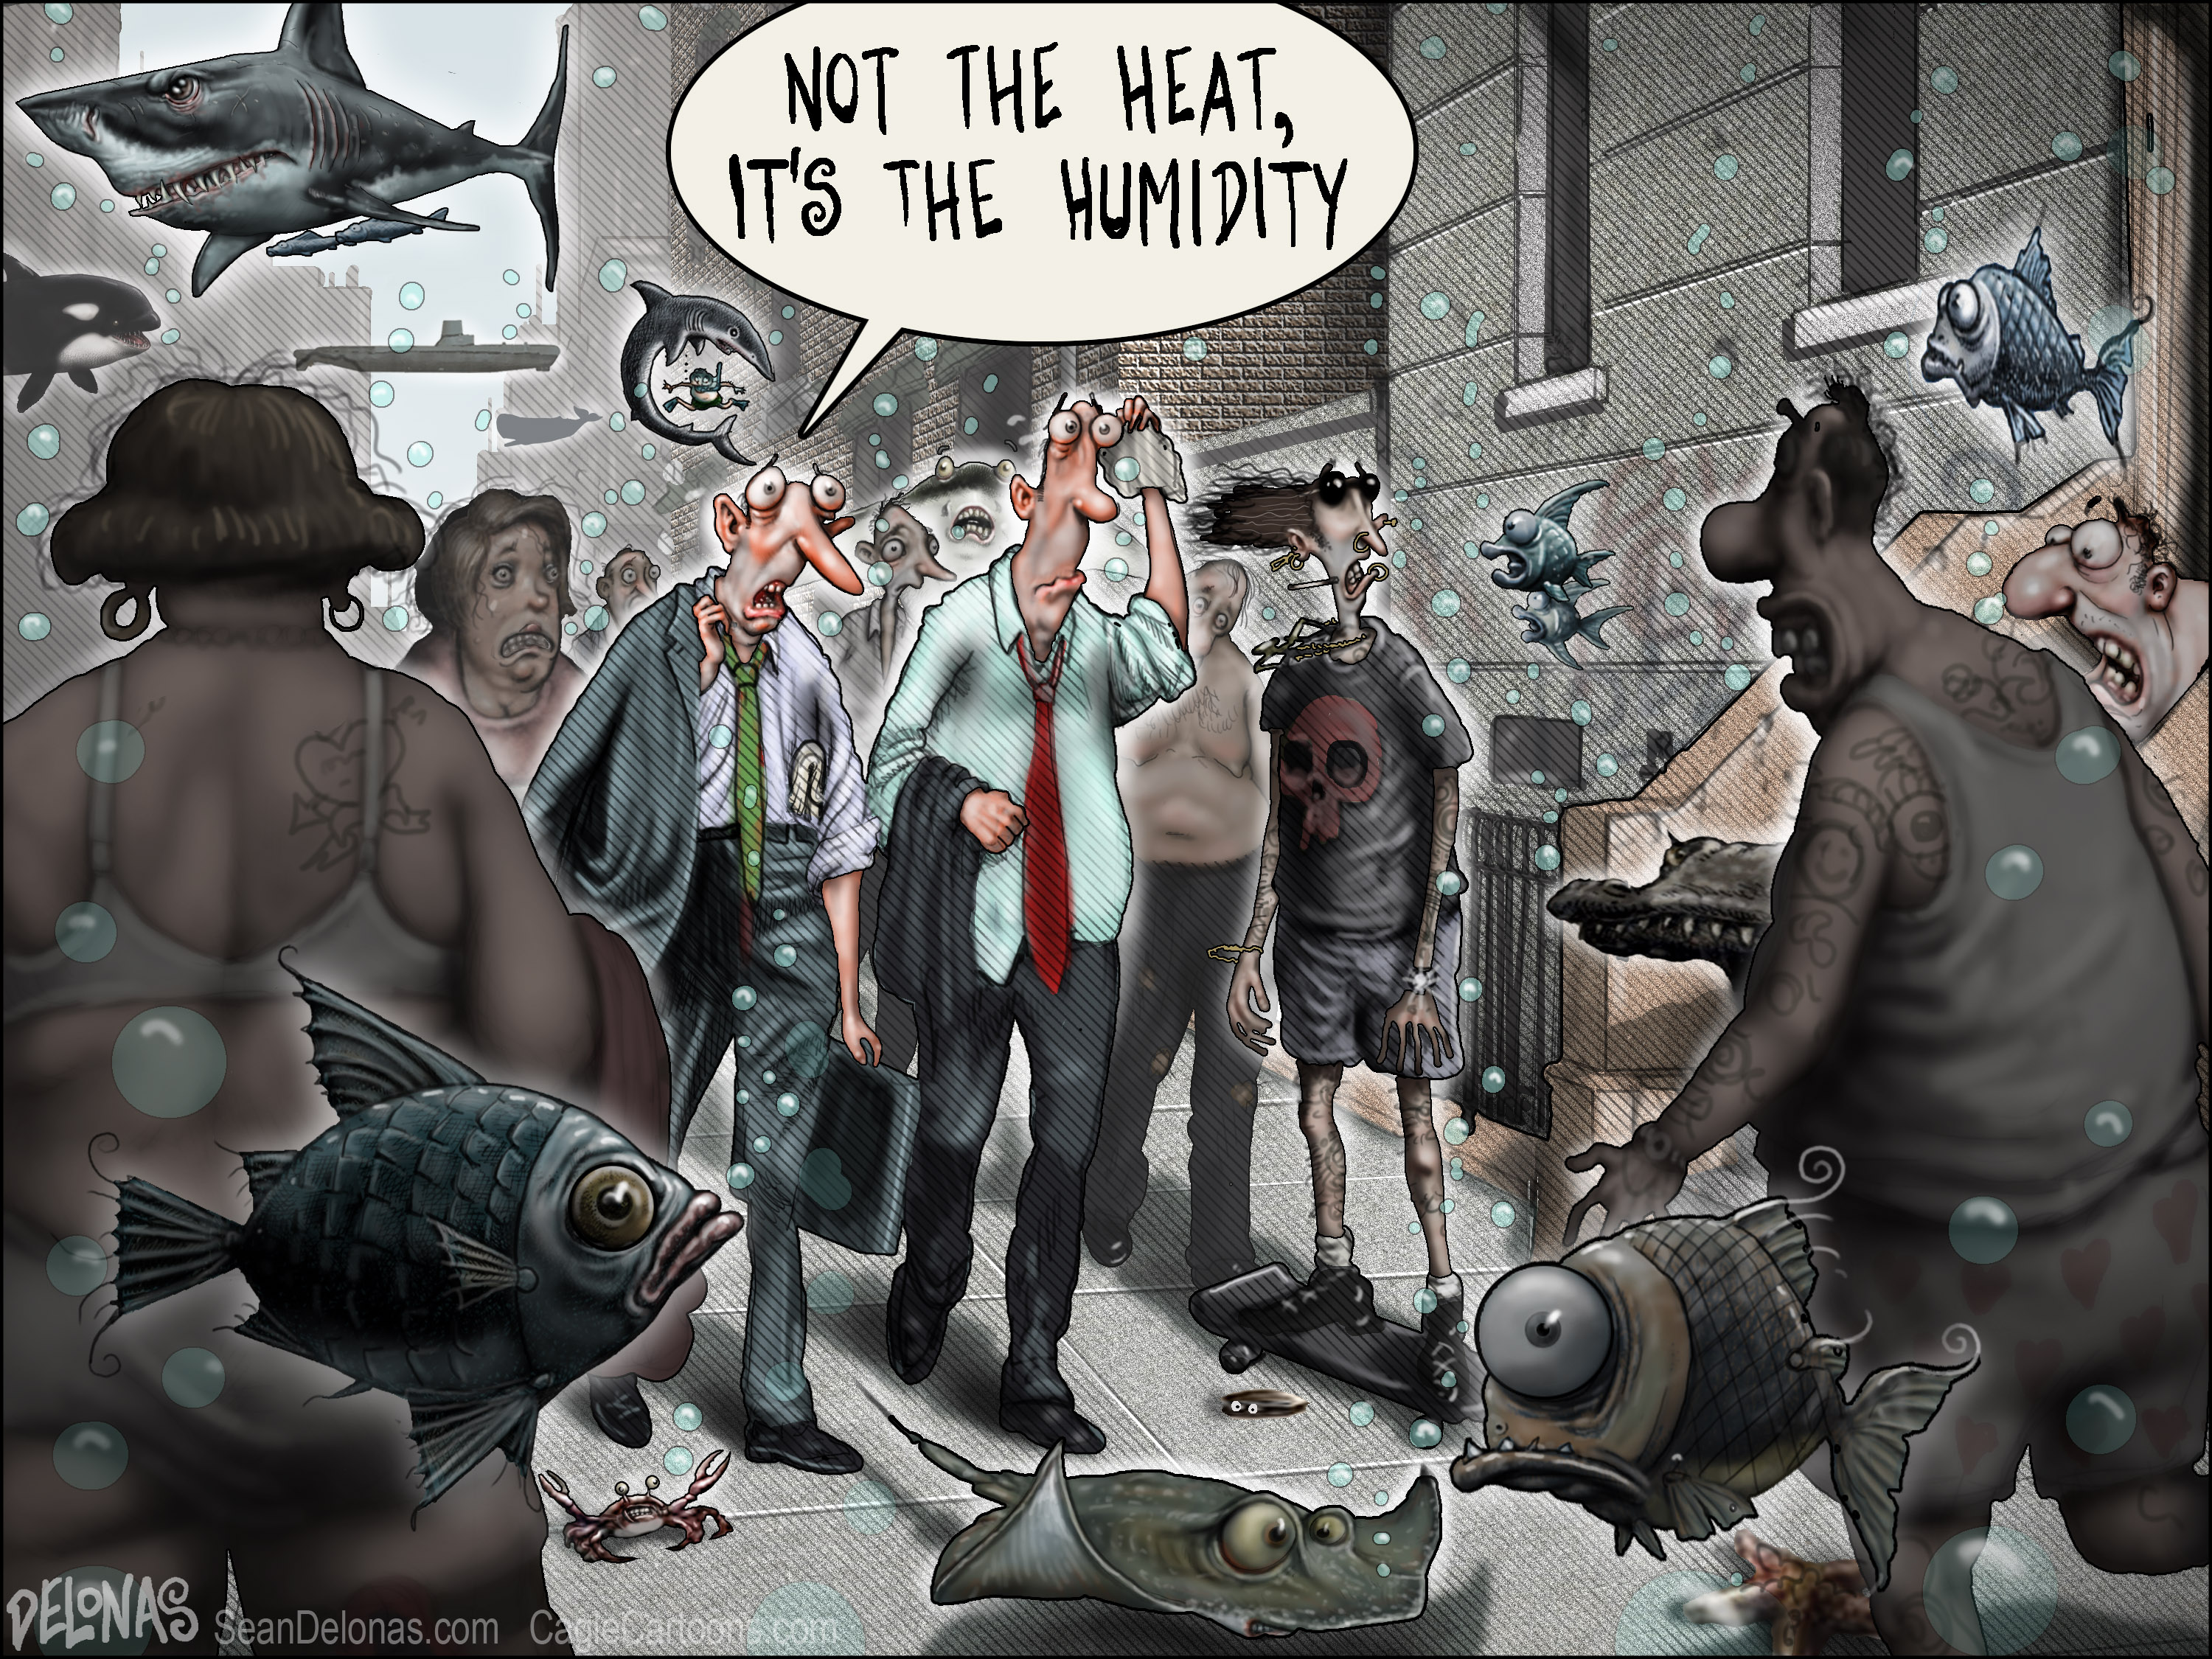 Editorial cartoon . hot weather heat humidity climate